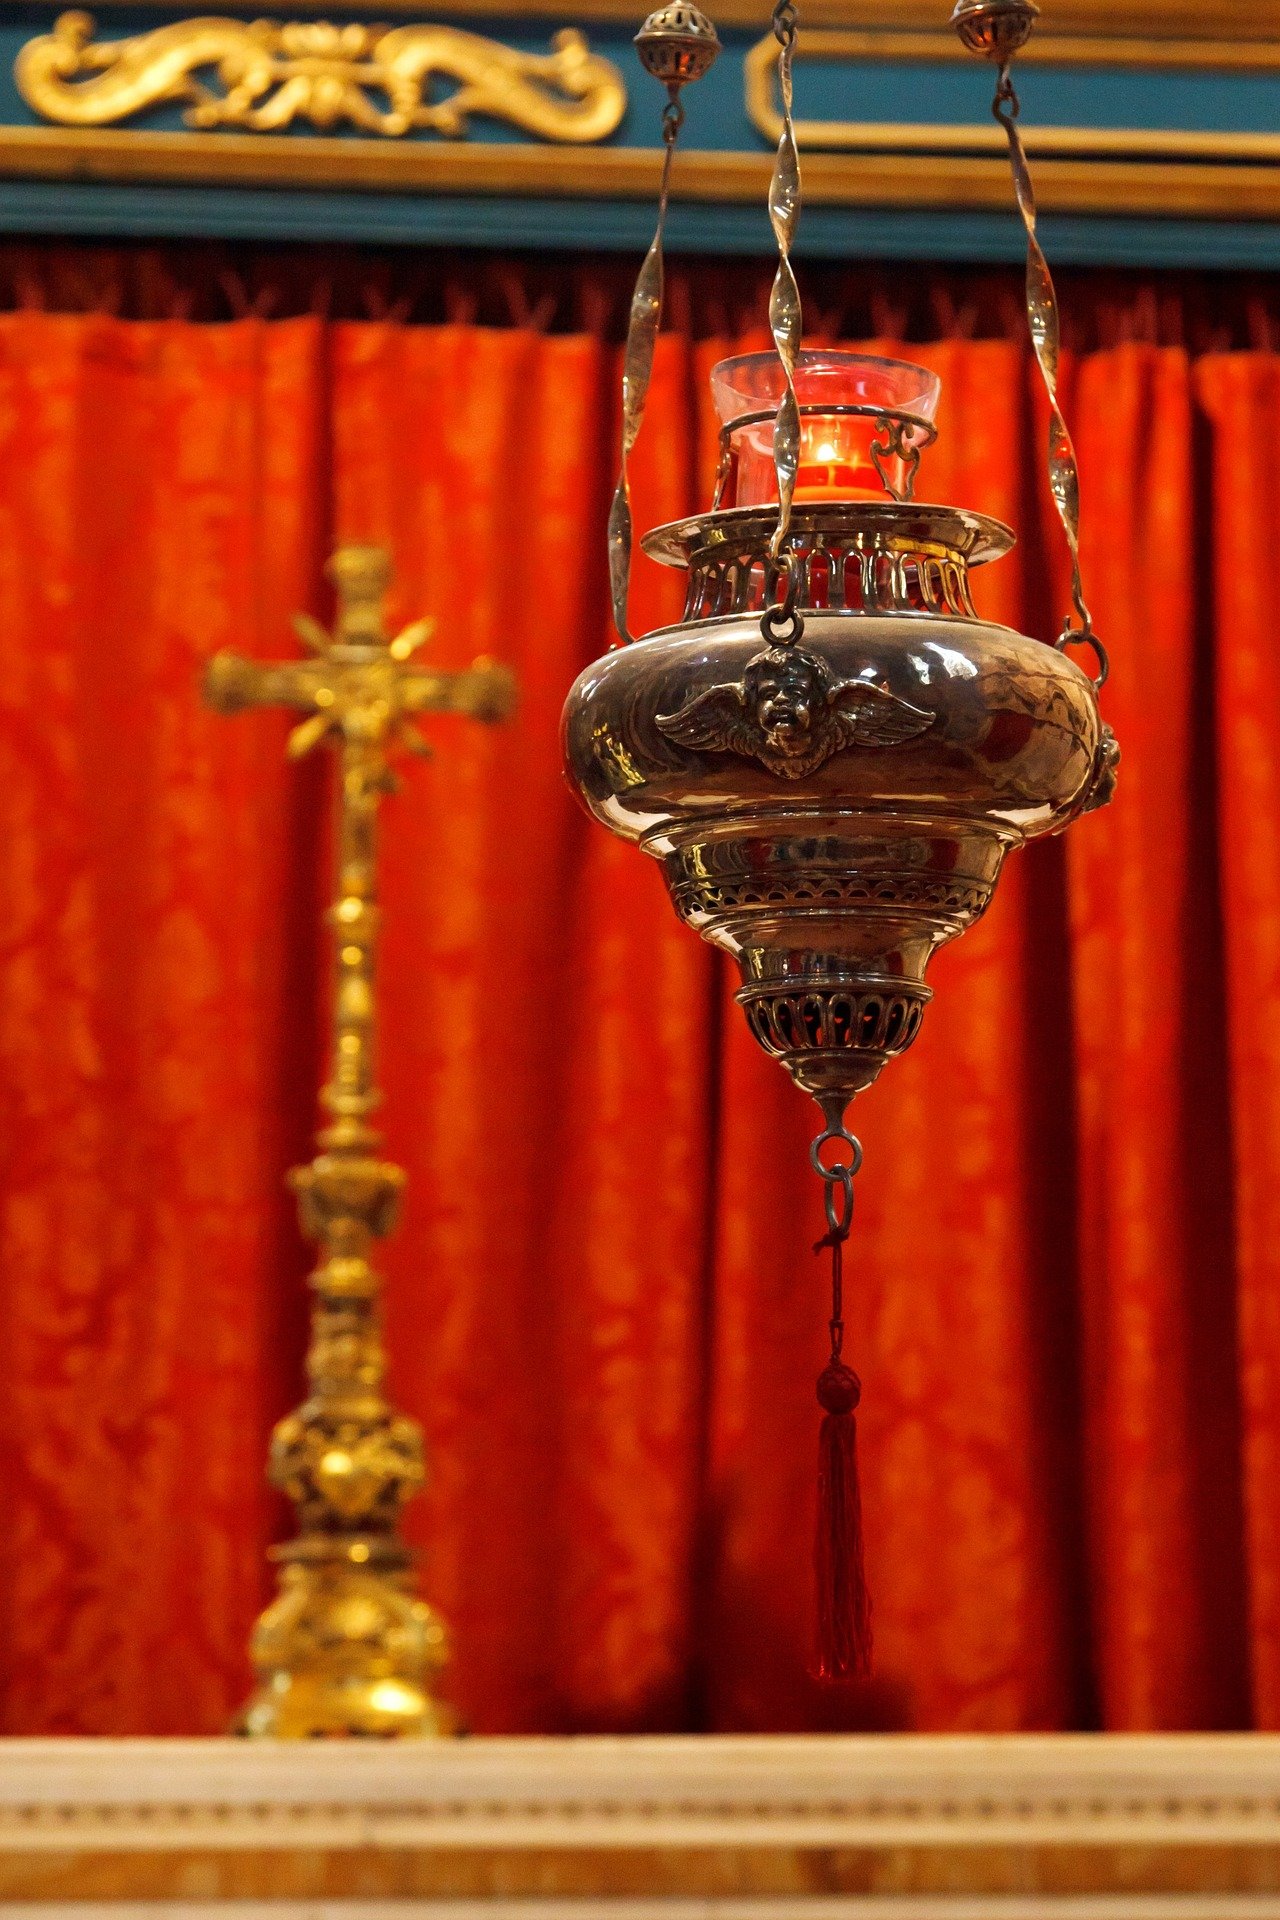 photo of a hanging sanctuary lamp